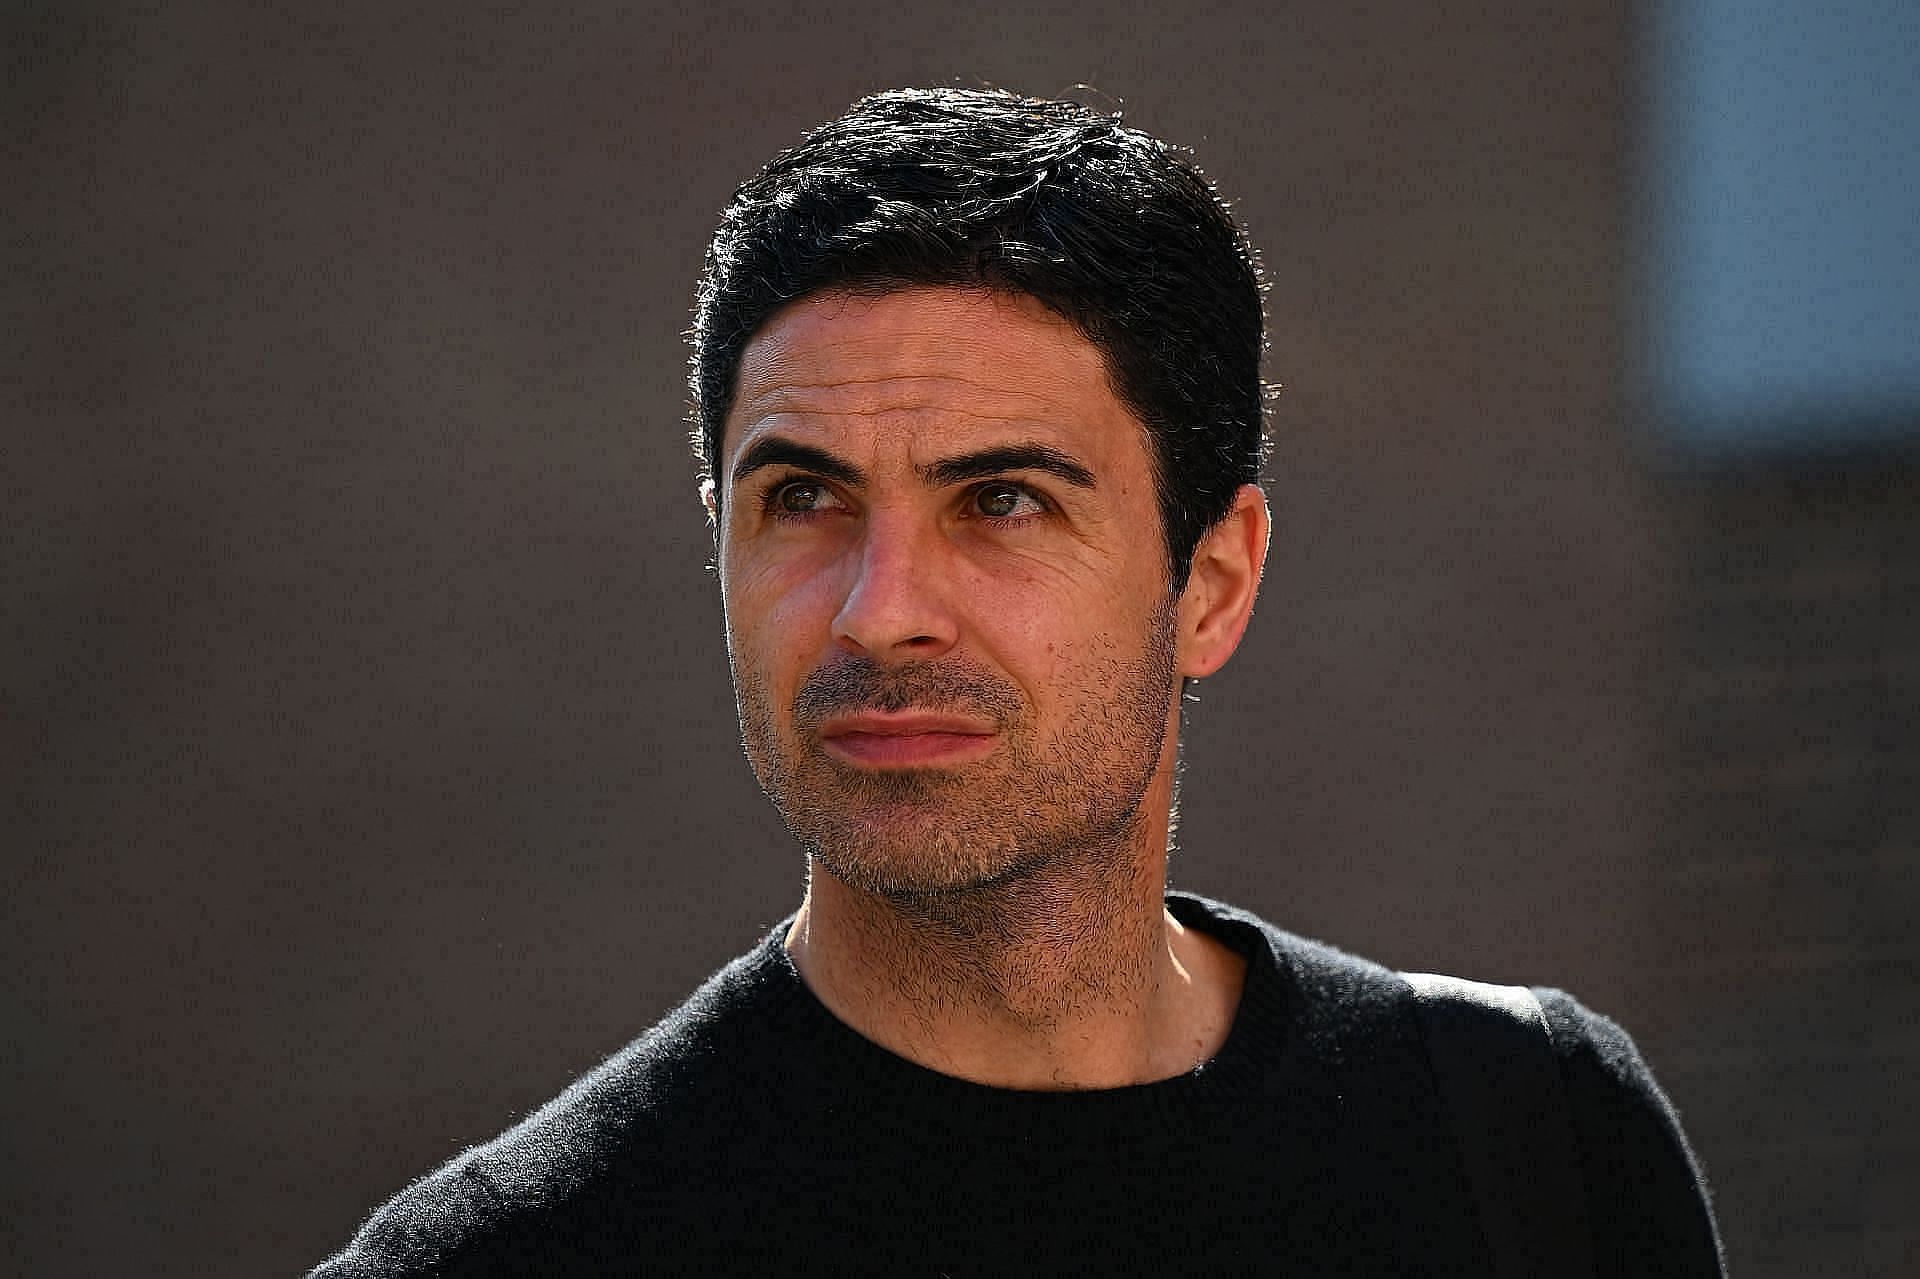 Arsenal manager Mikel Arteta is working to reinforce his squad